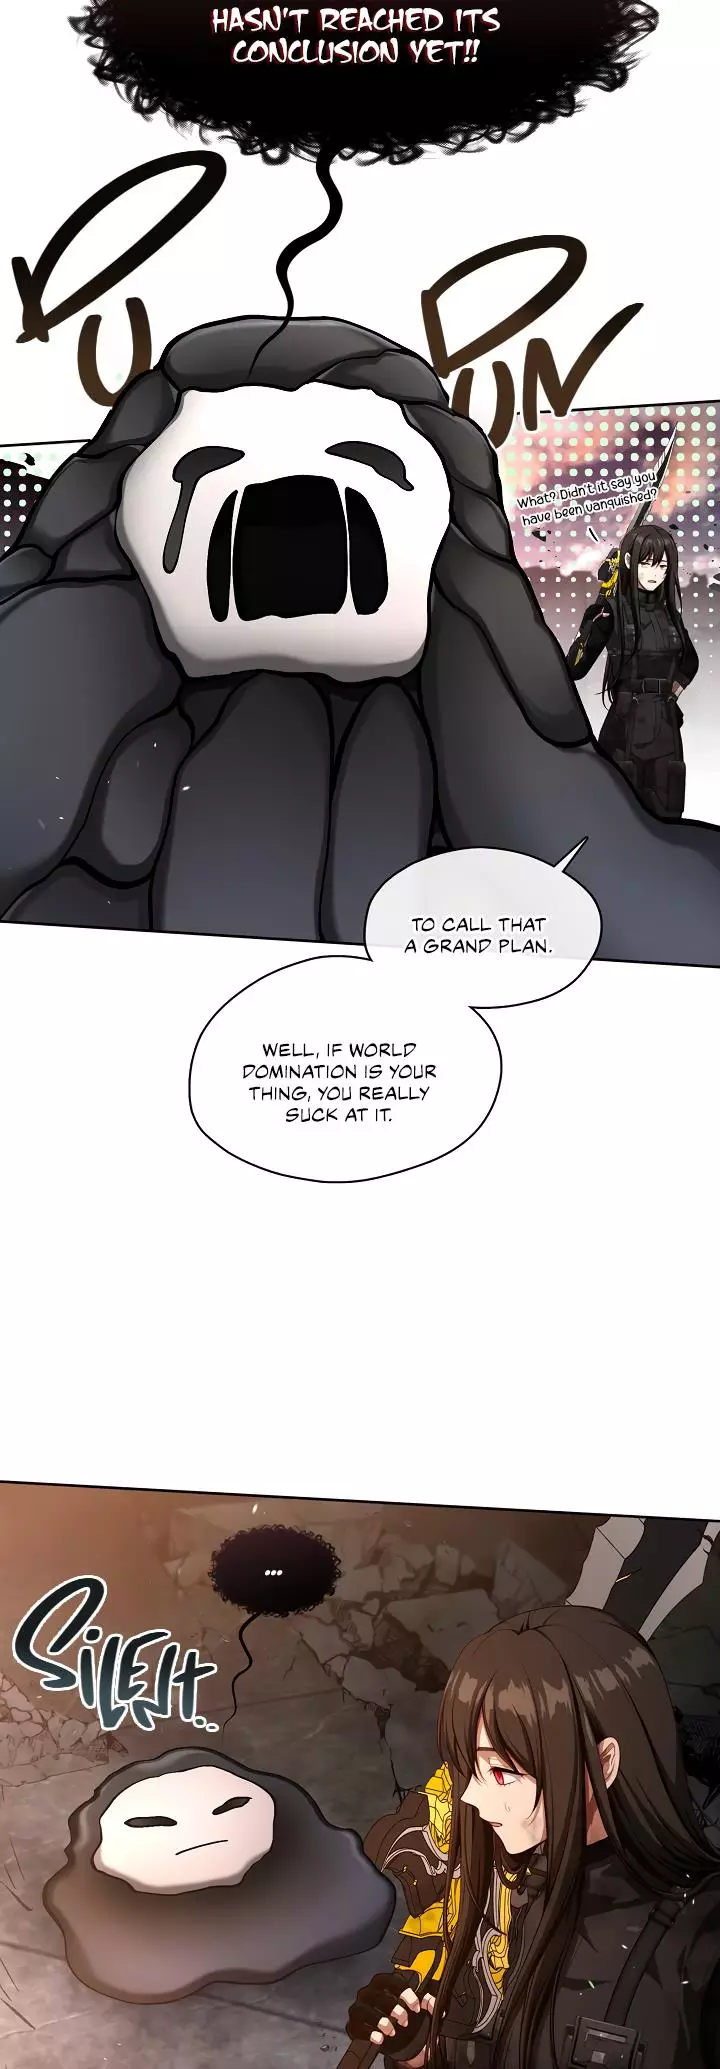 S-Class Hunter Doesn't Want To Be A Villainous Princess - 1 page 5-ed1c1b59